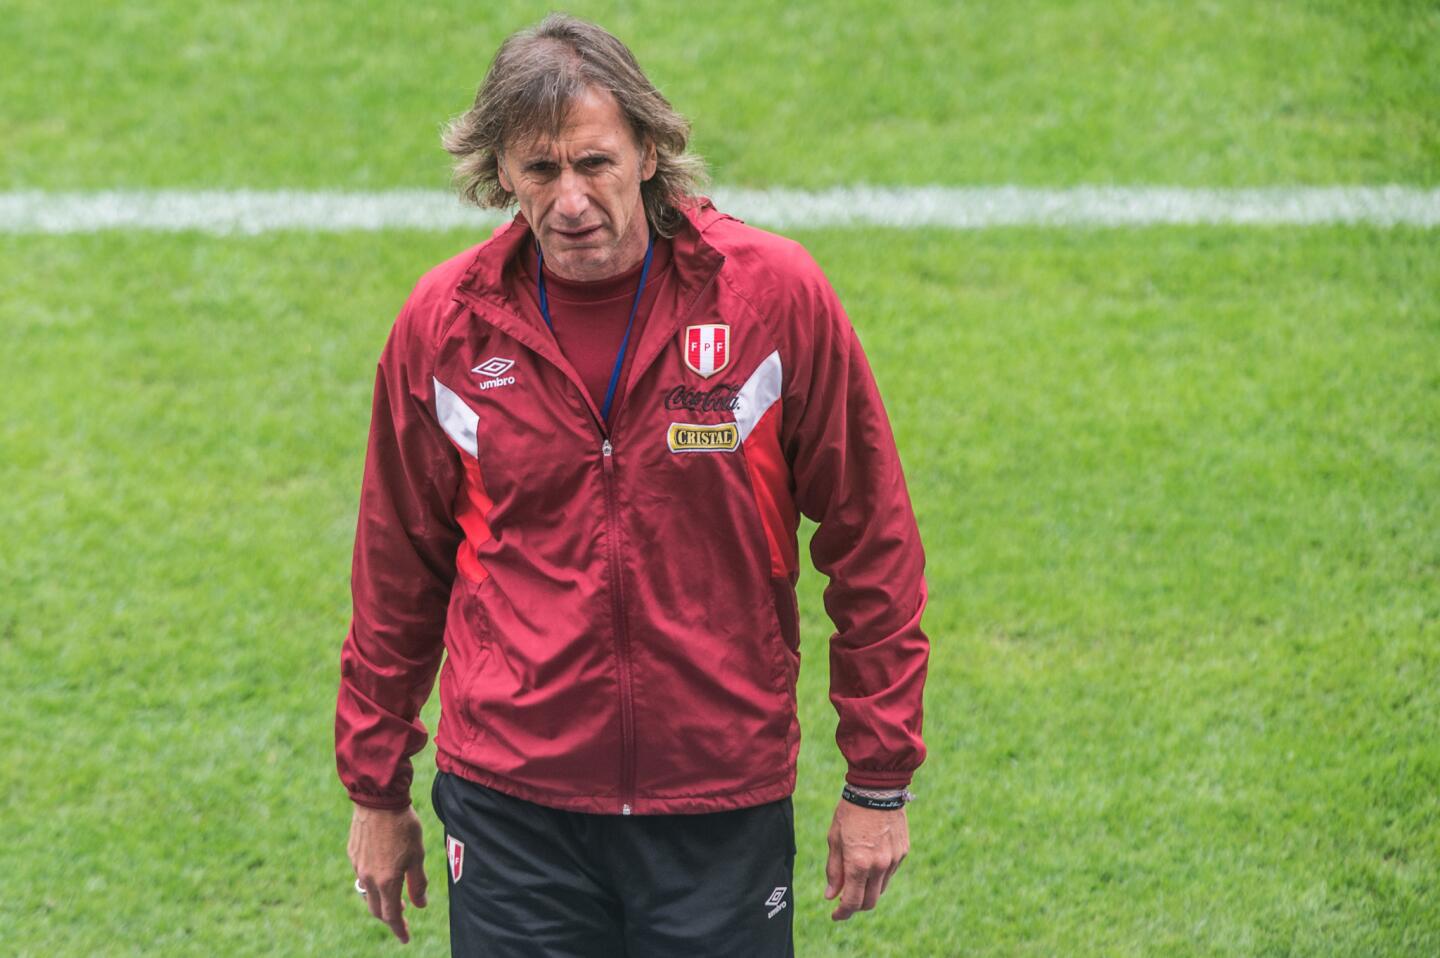 Peru's coach, Argentine Ricardo Gareca takes part in a training session in Lima on October 9, 2017 ahead of their 2018 World Cup football qualifier match against Colombia, on October 10 in Lima. / AFP PHOTO / ERNESTO BENAVIDES (Photo credit should read ERNESTO BENAVIDES/AFP/Getty Images)